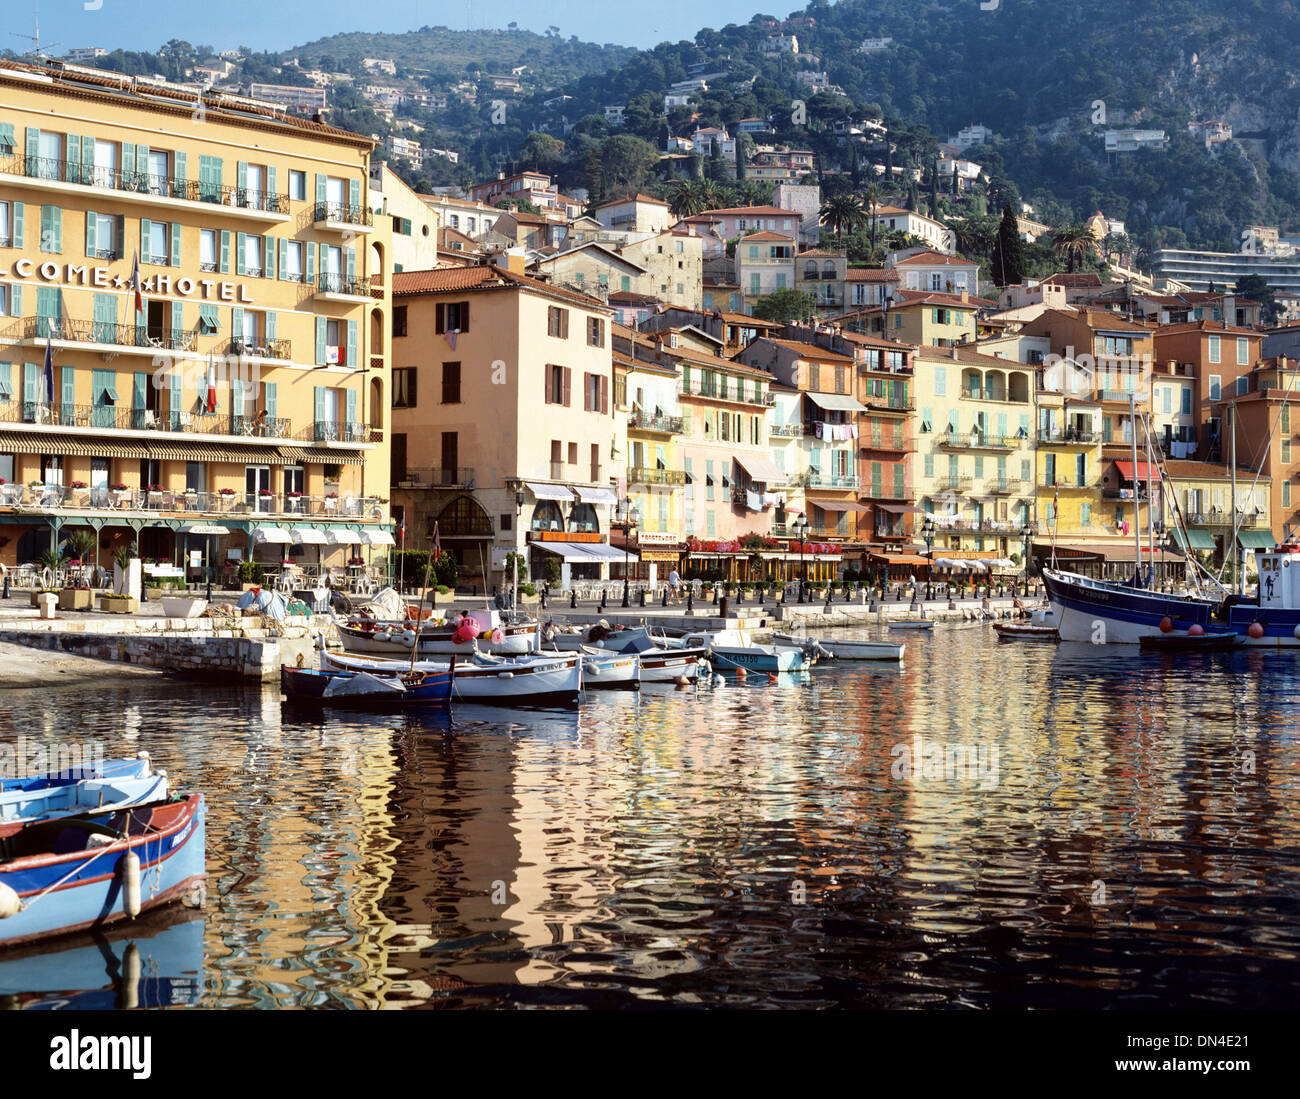 Colourful building facades on waterfront, Villefranche-sur-Mer, Alpes-Maritimes, France Stock Photo